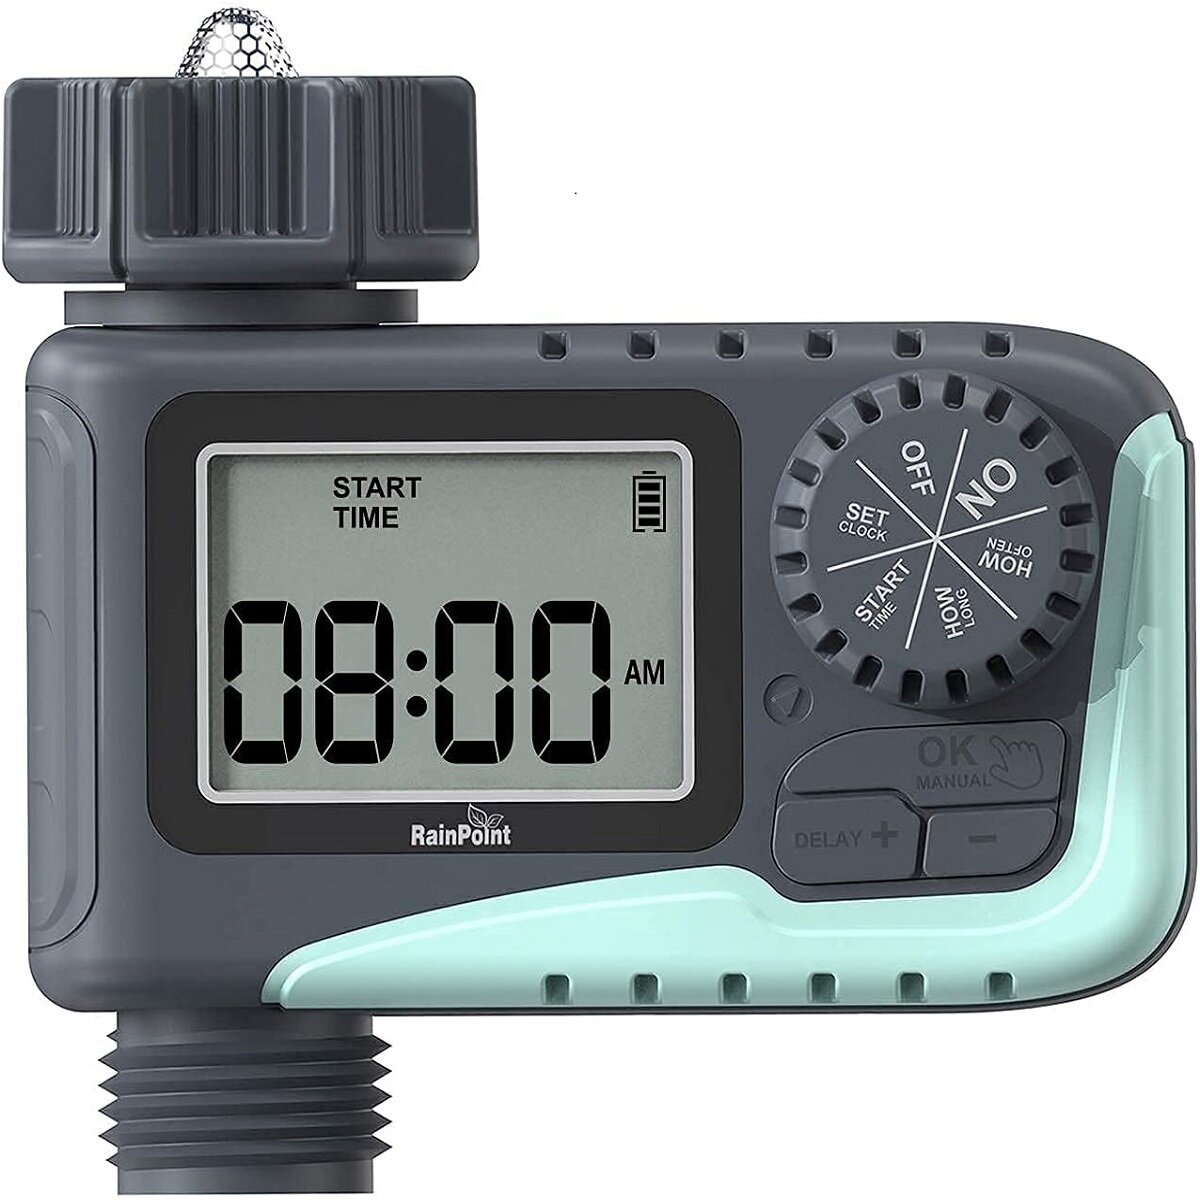 

RAINPOINT Sprinkler Timer Water Timer with Rain Delay Manual Automatic Watering System Waterproof Digital Irrigation Tim